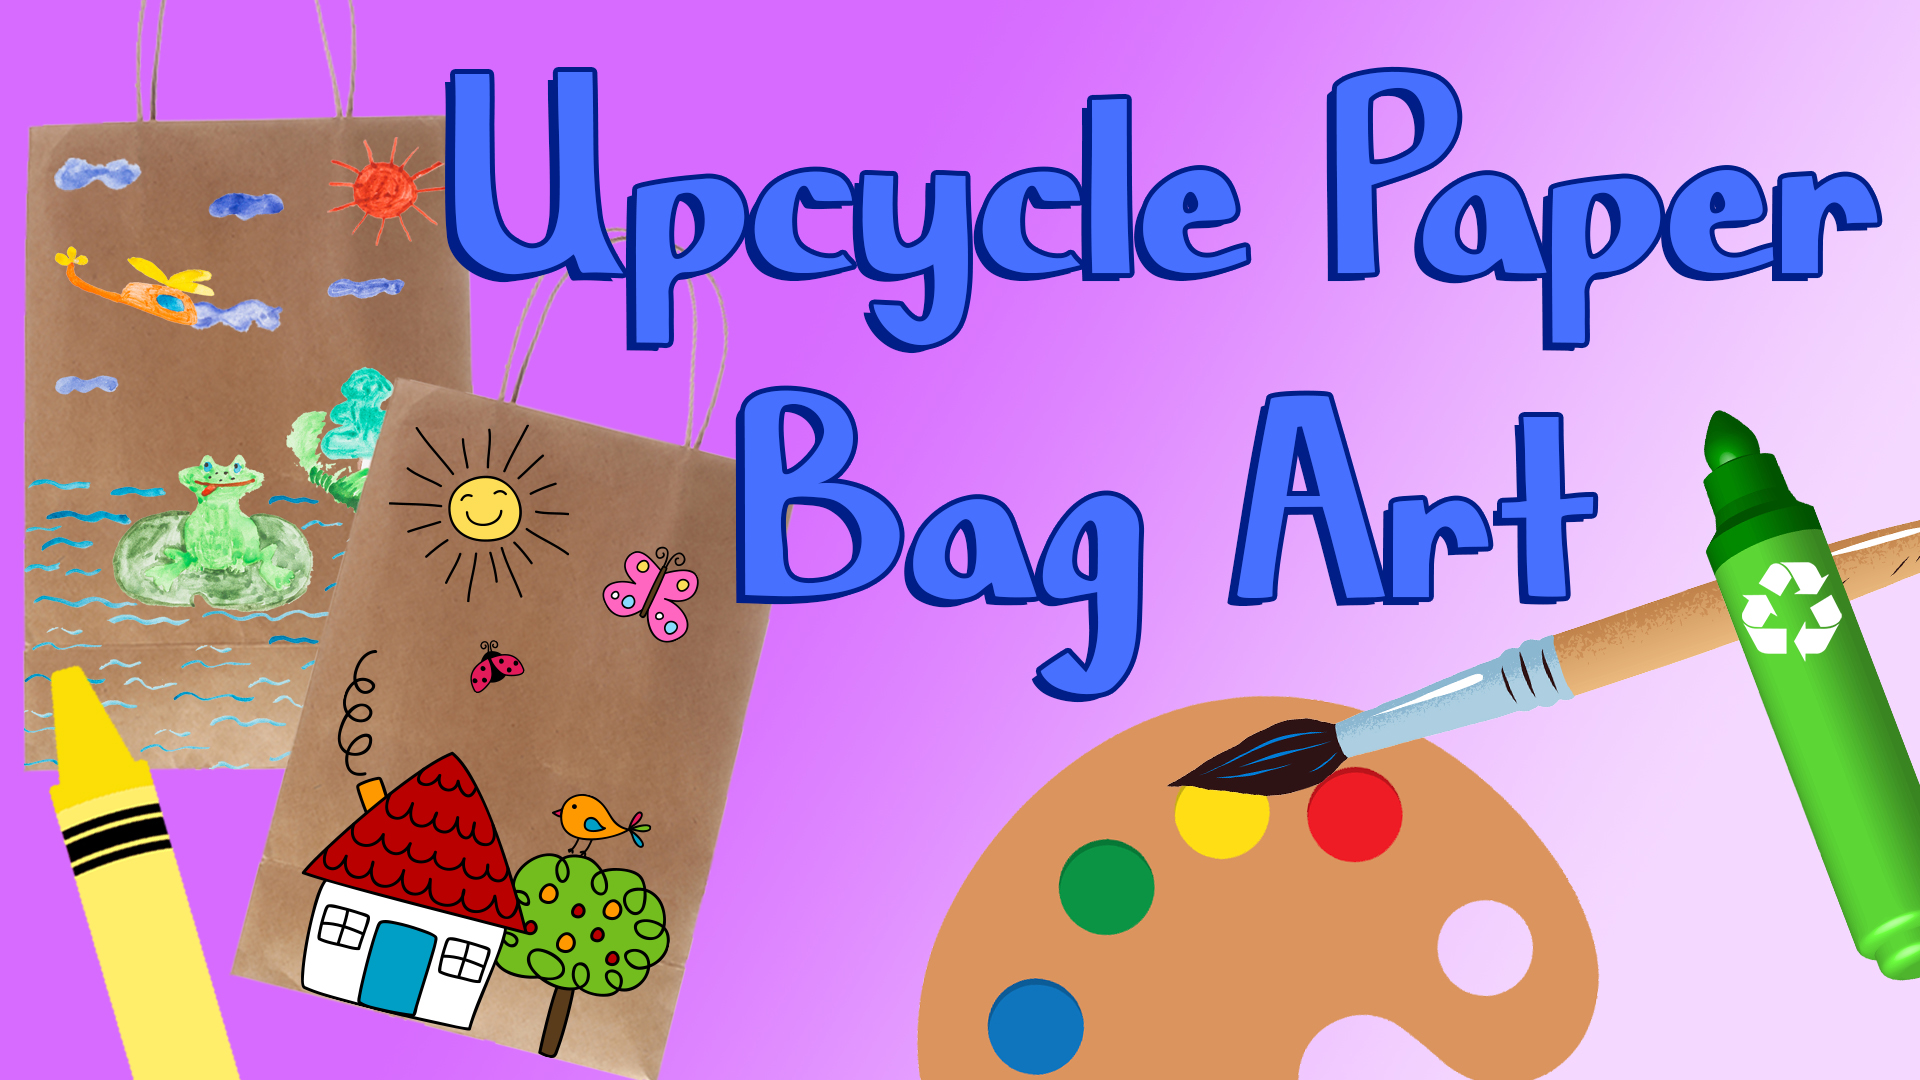 Image reads "Upcycle Paper Bag Art" against a purple gradient background. Two brown paper bags with pictures drawn on them are to the left of the title. Art supplies are scattered among the image.